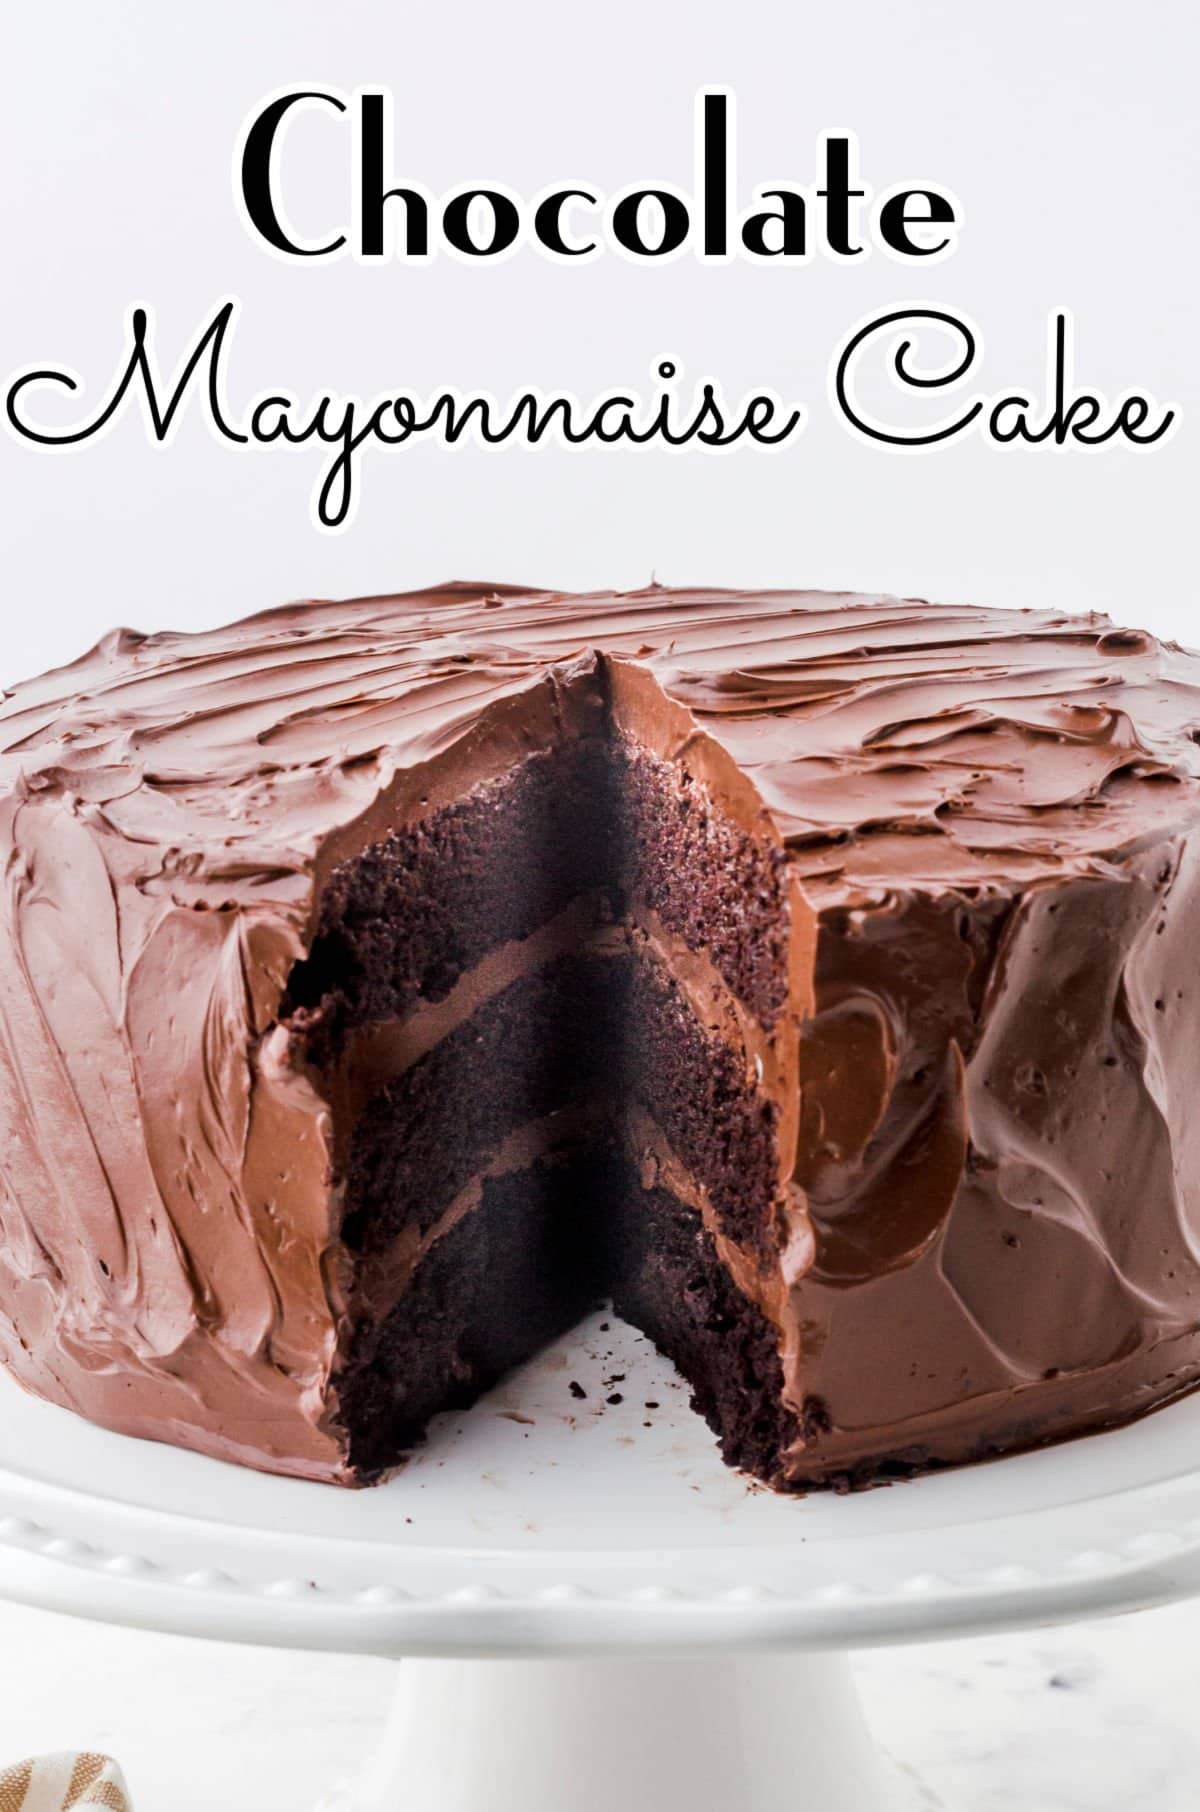 Chocolate cake with slice removed to show layers. Title text overlay.